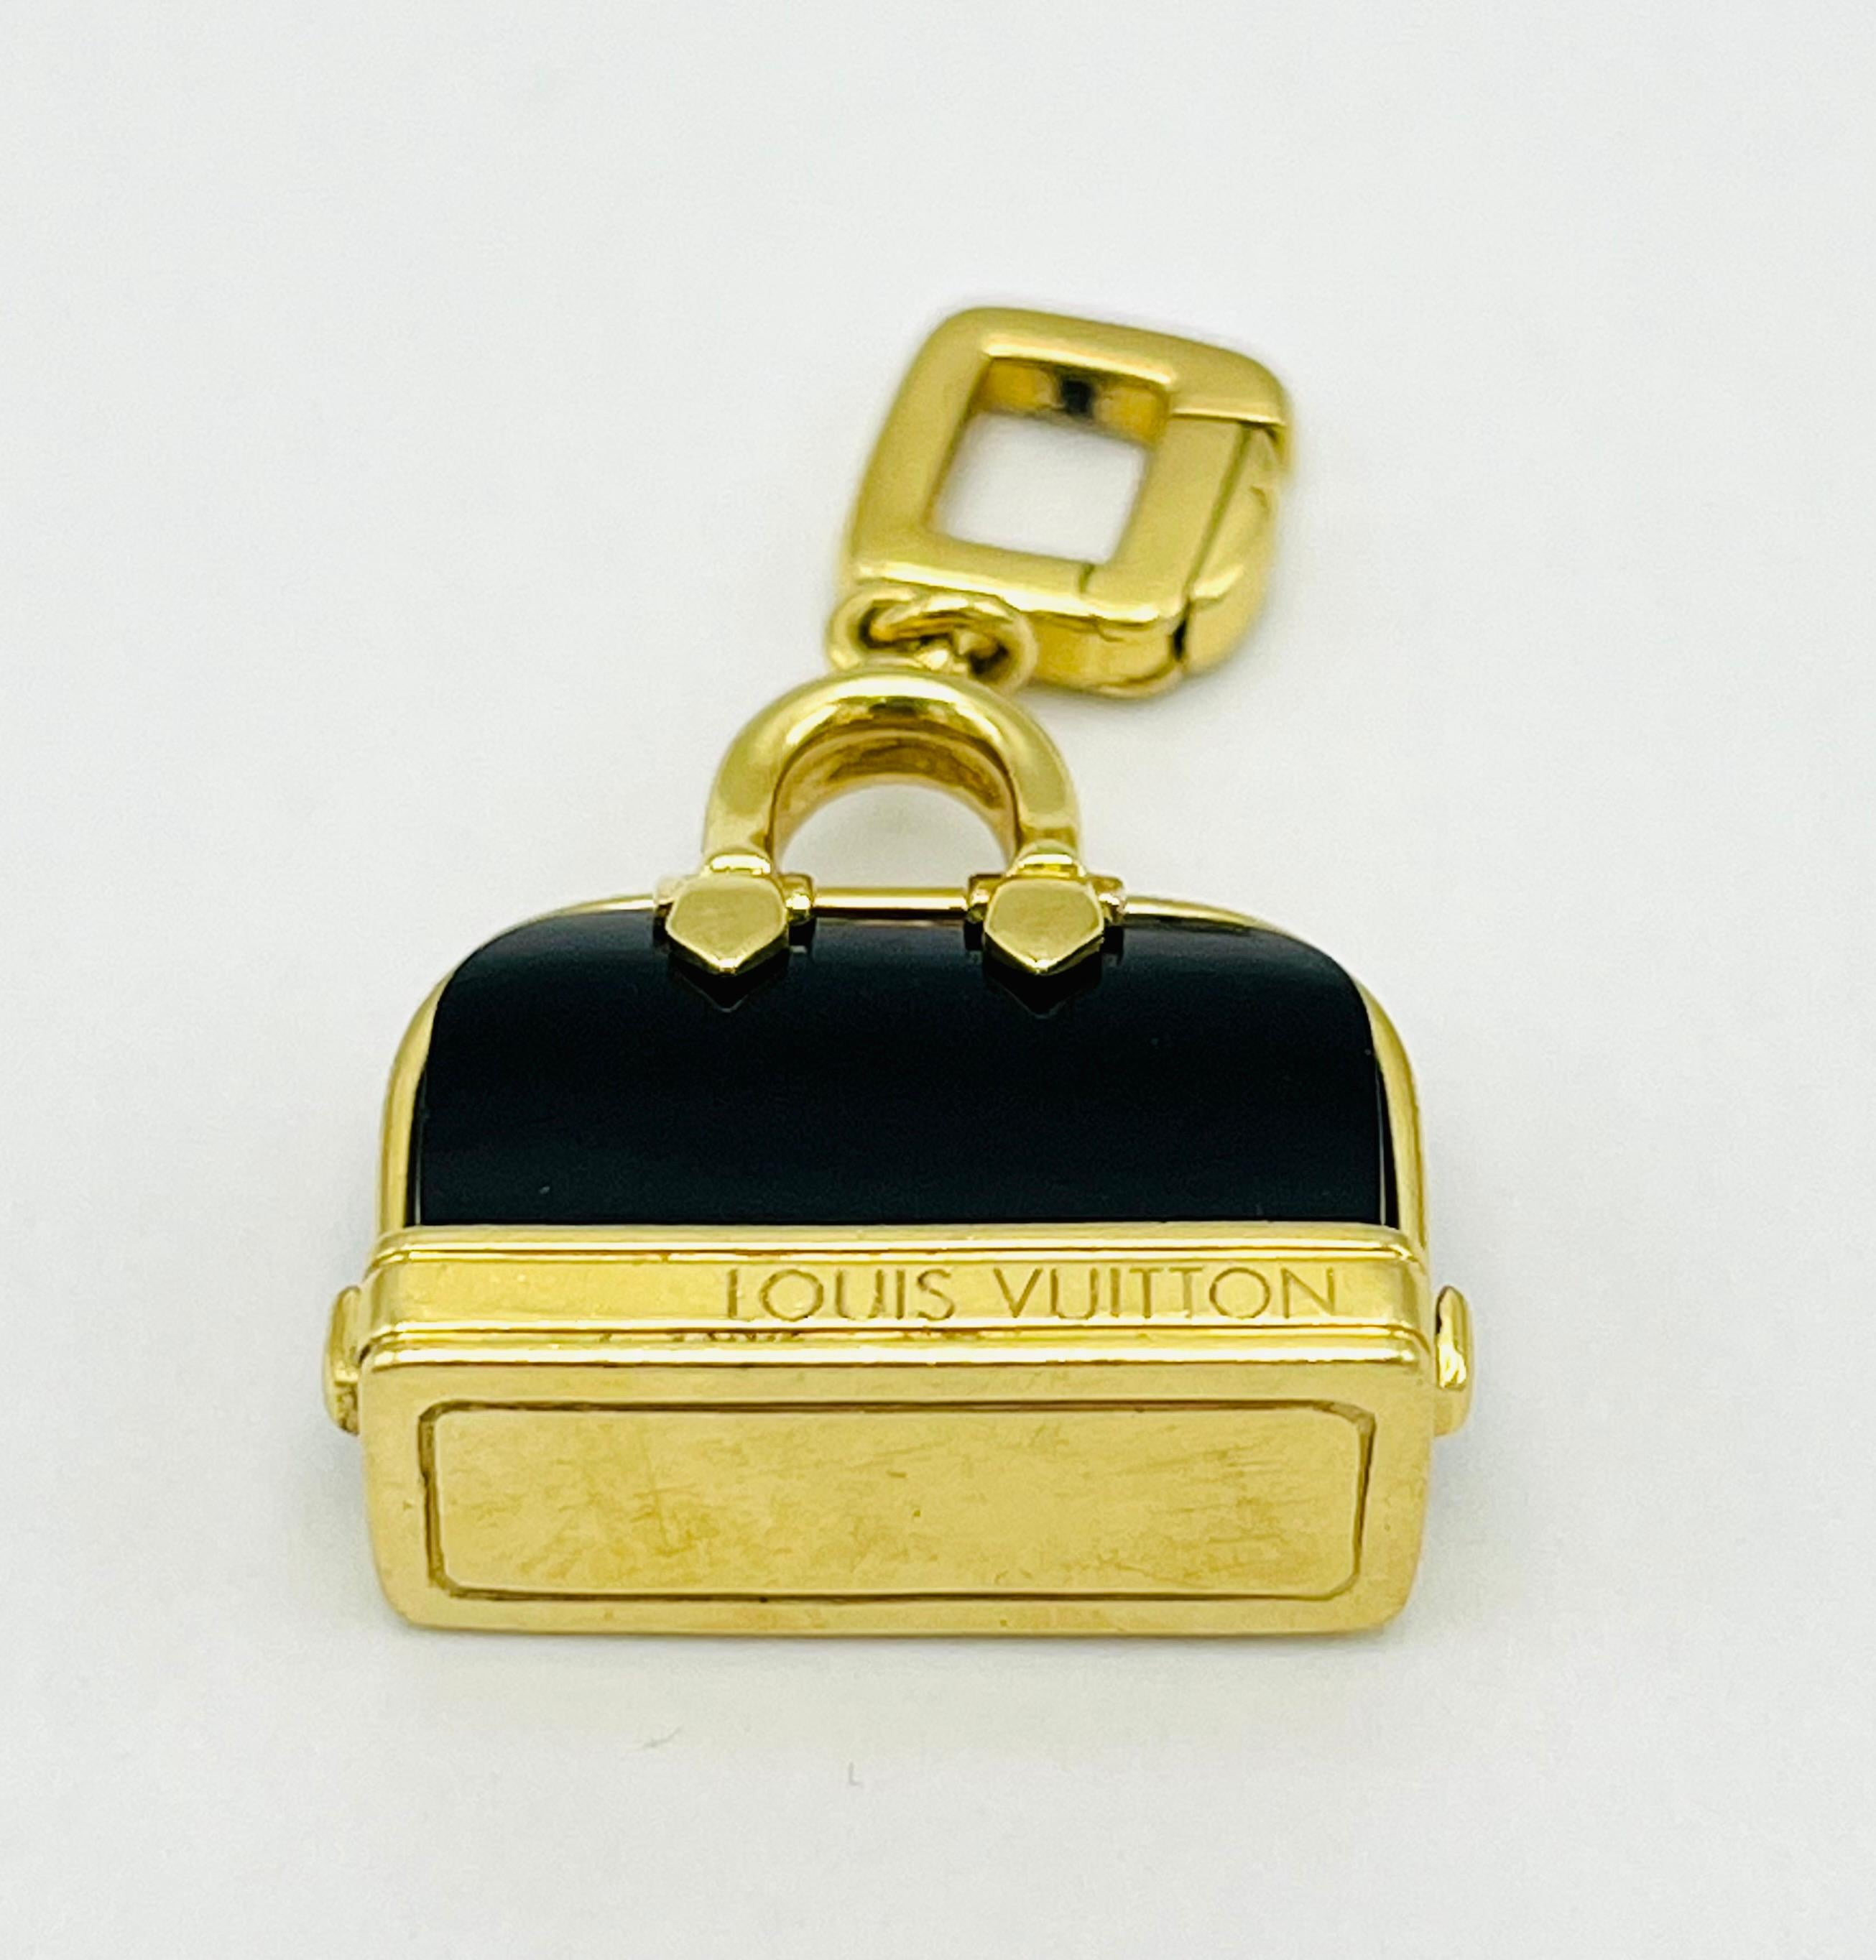 Product details:

The charm is designed by Louis Vuitton, it is made out of 18K yellow gold and black enamel.